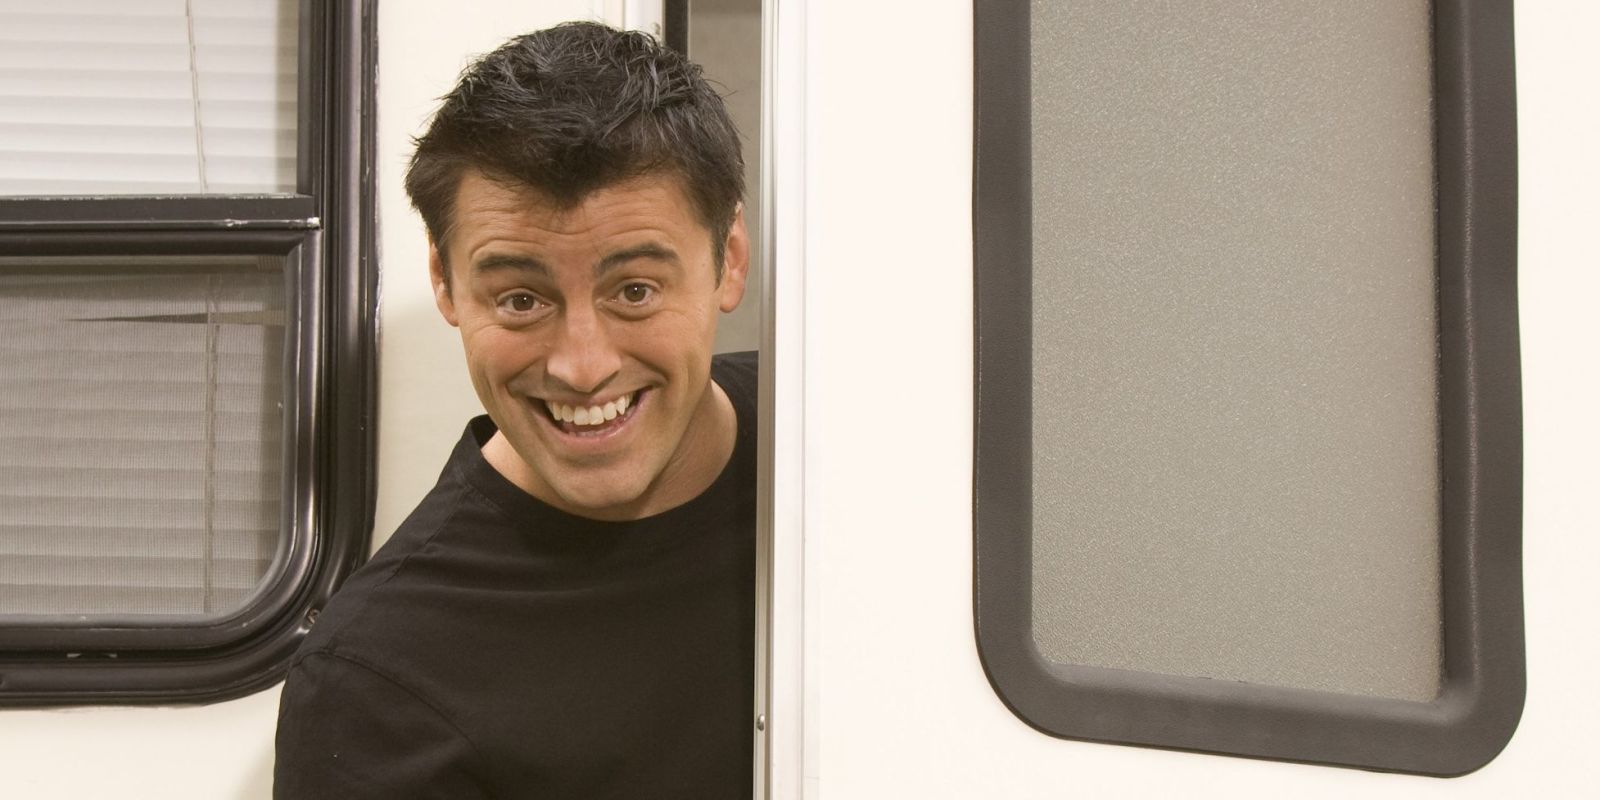 Joey exits a movie trailer in the spin-off, Joey